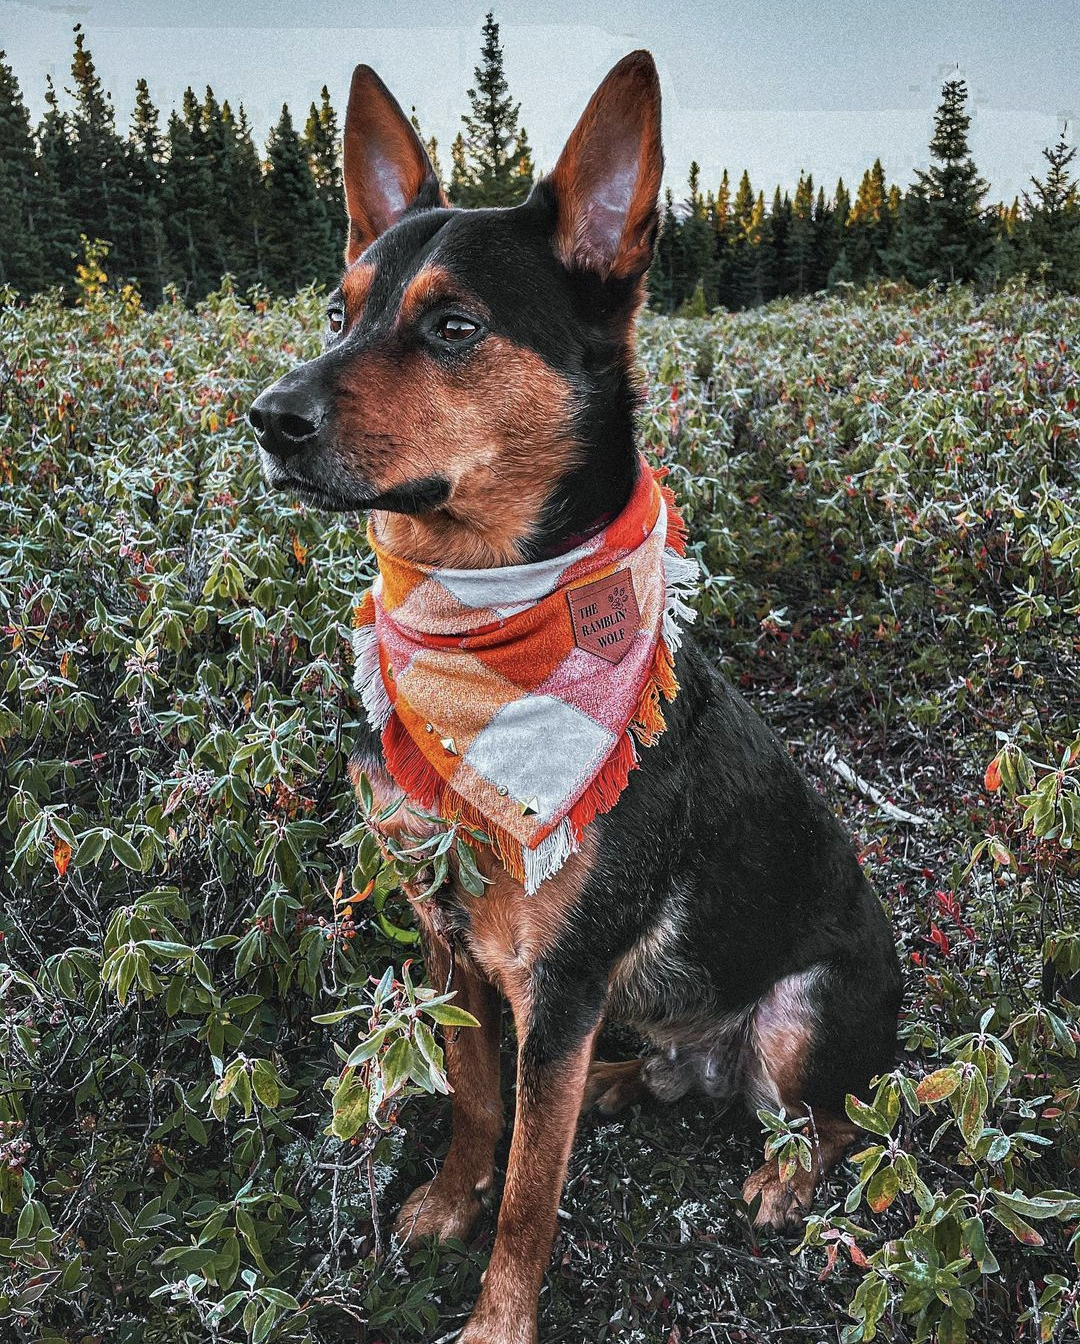 SYRUP AND CIDER Flannel Bandana